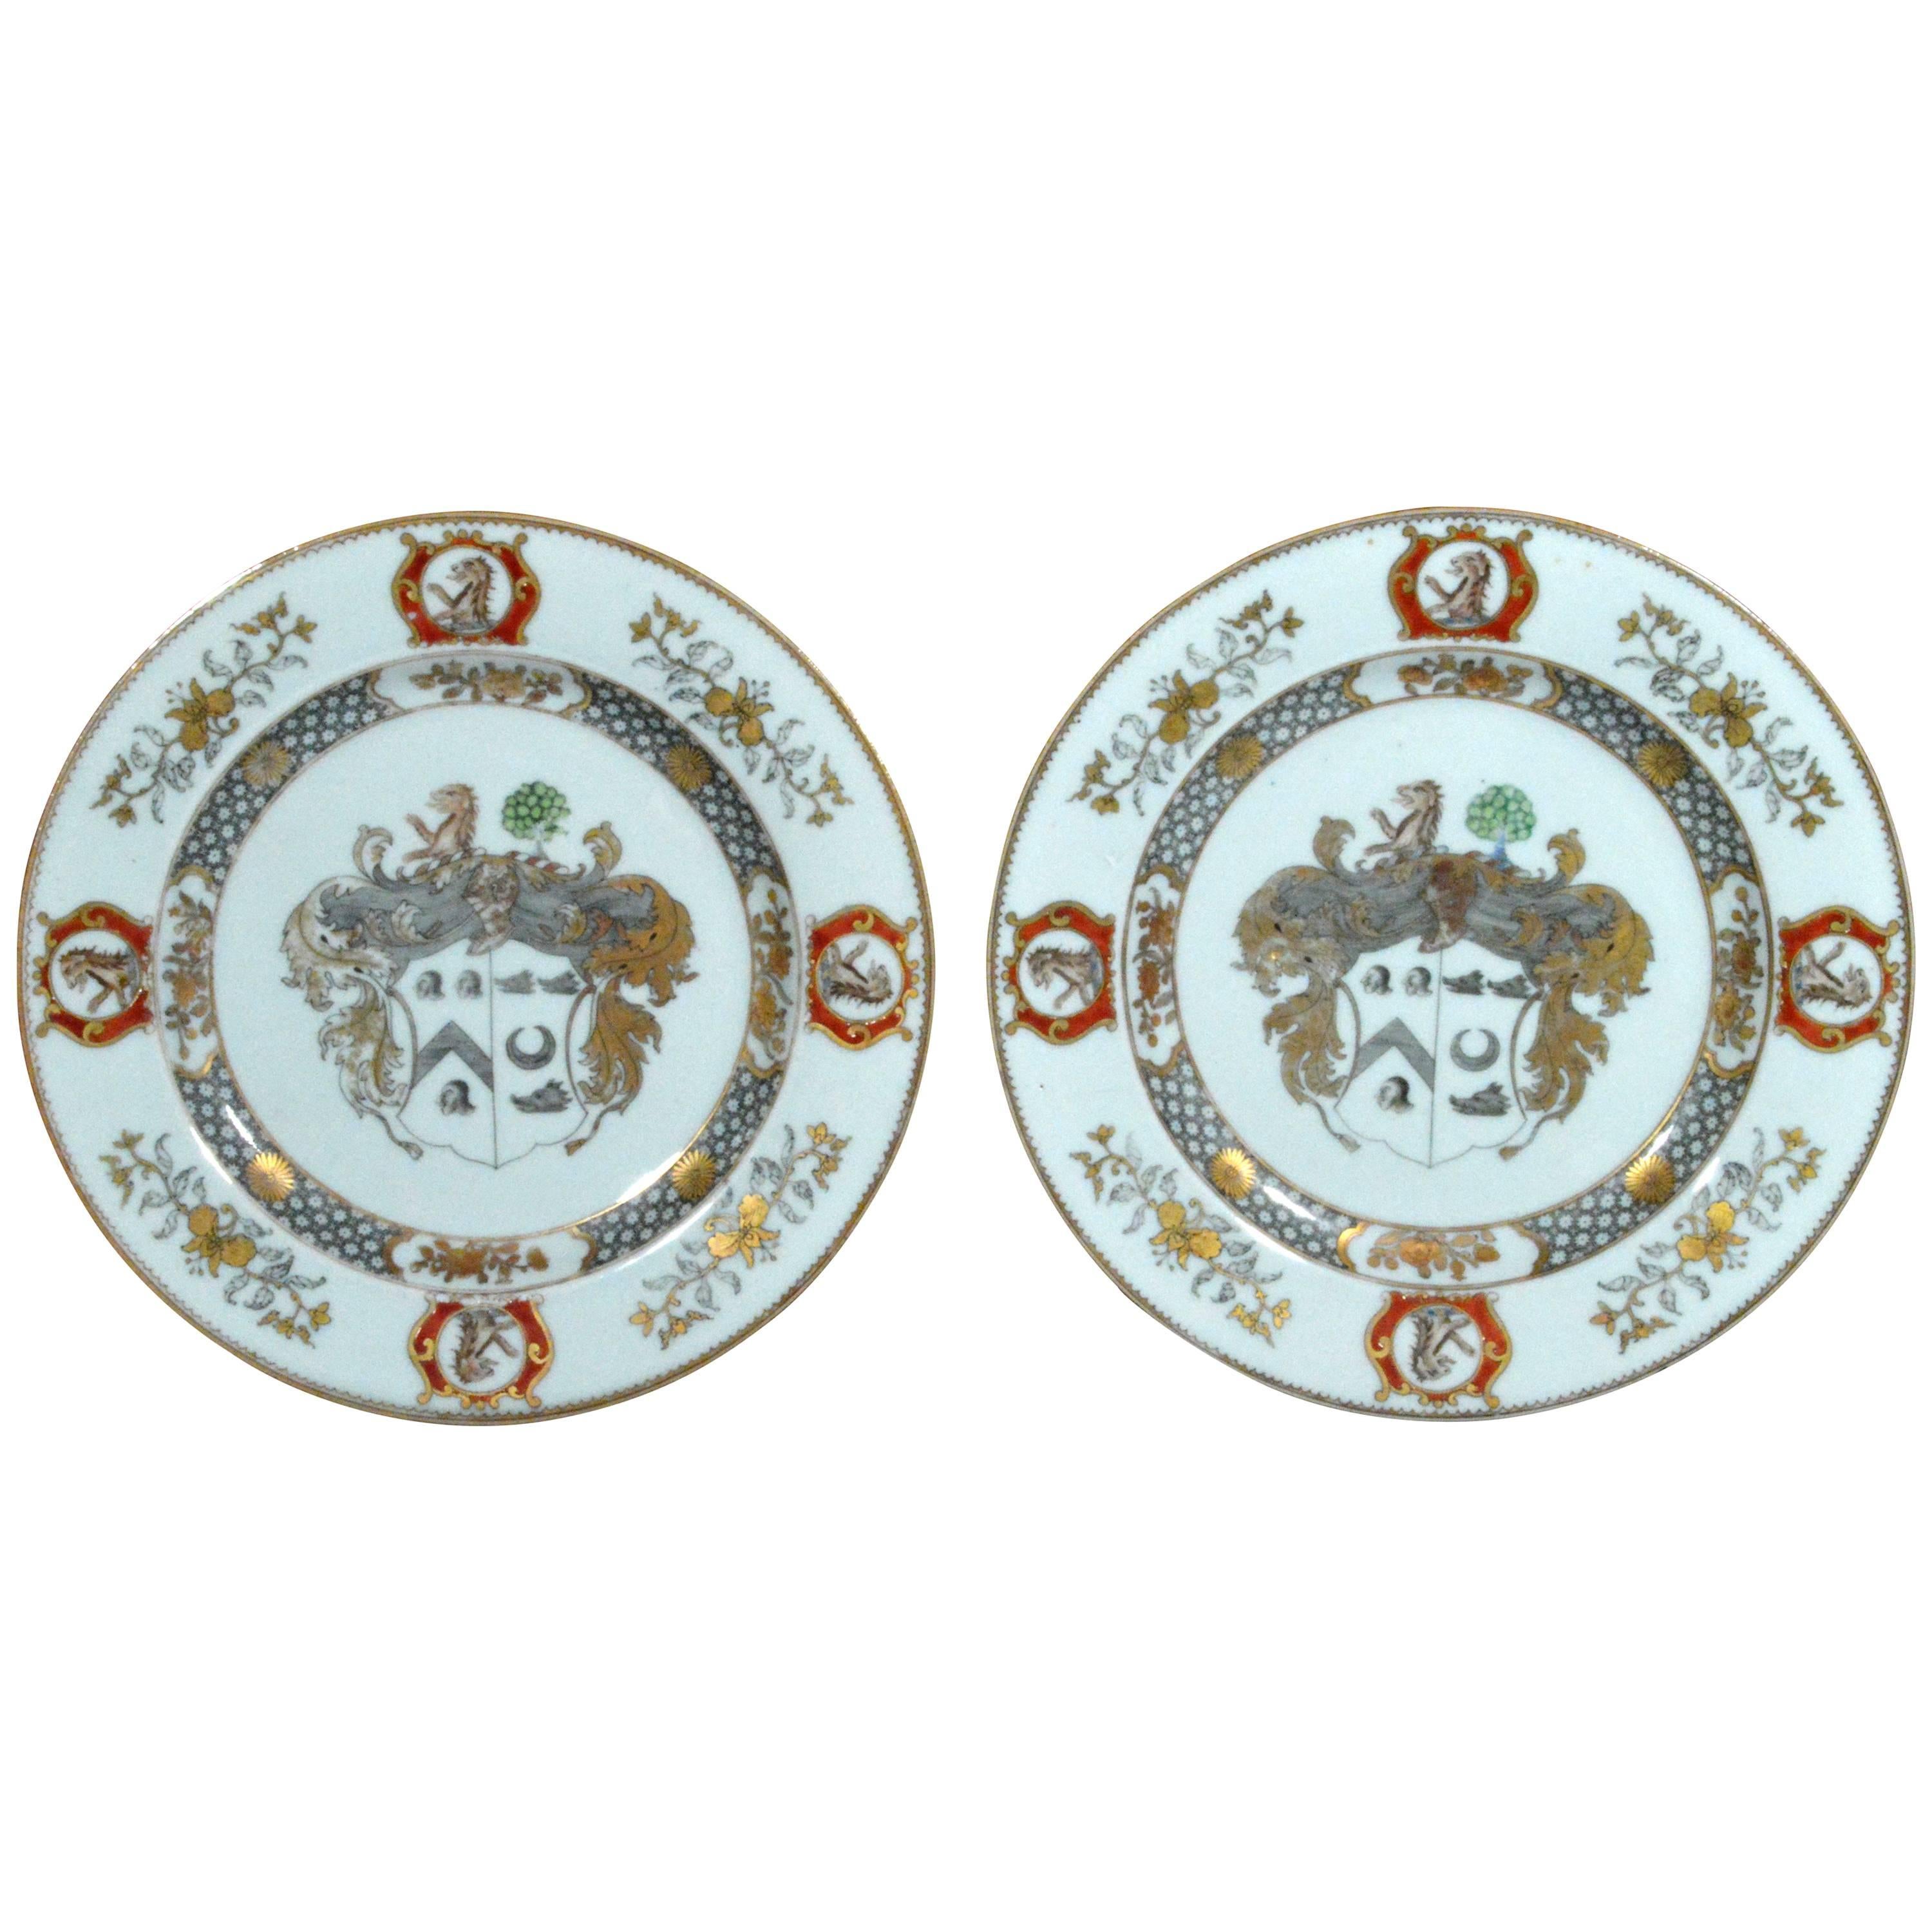 Chinese Export Armorial Pair of Plates for Scotland,  Arms of More Impaling Hog